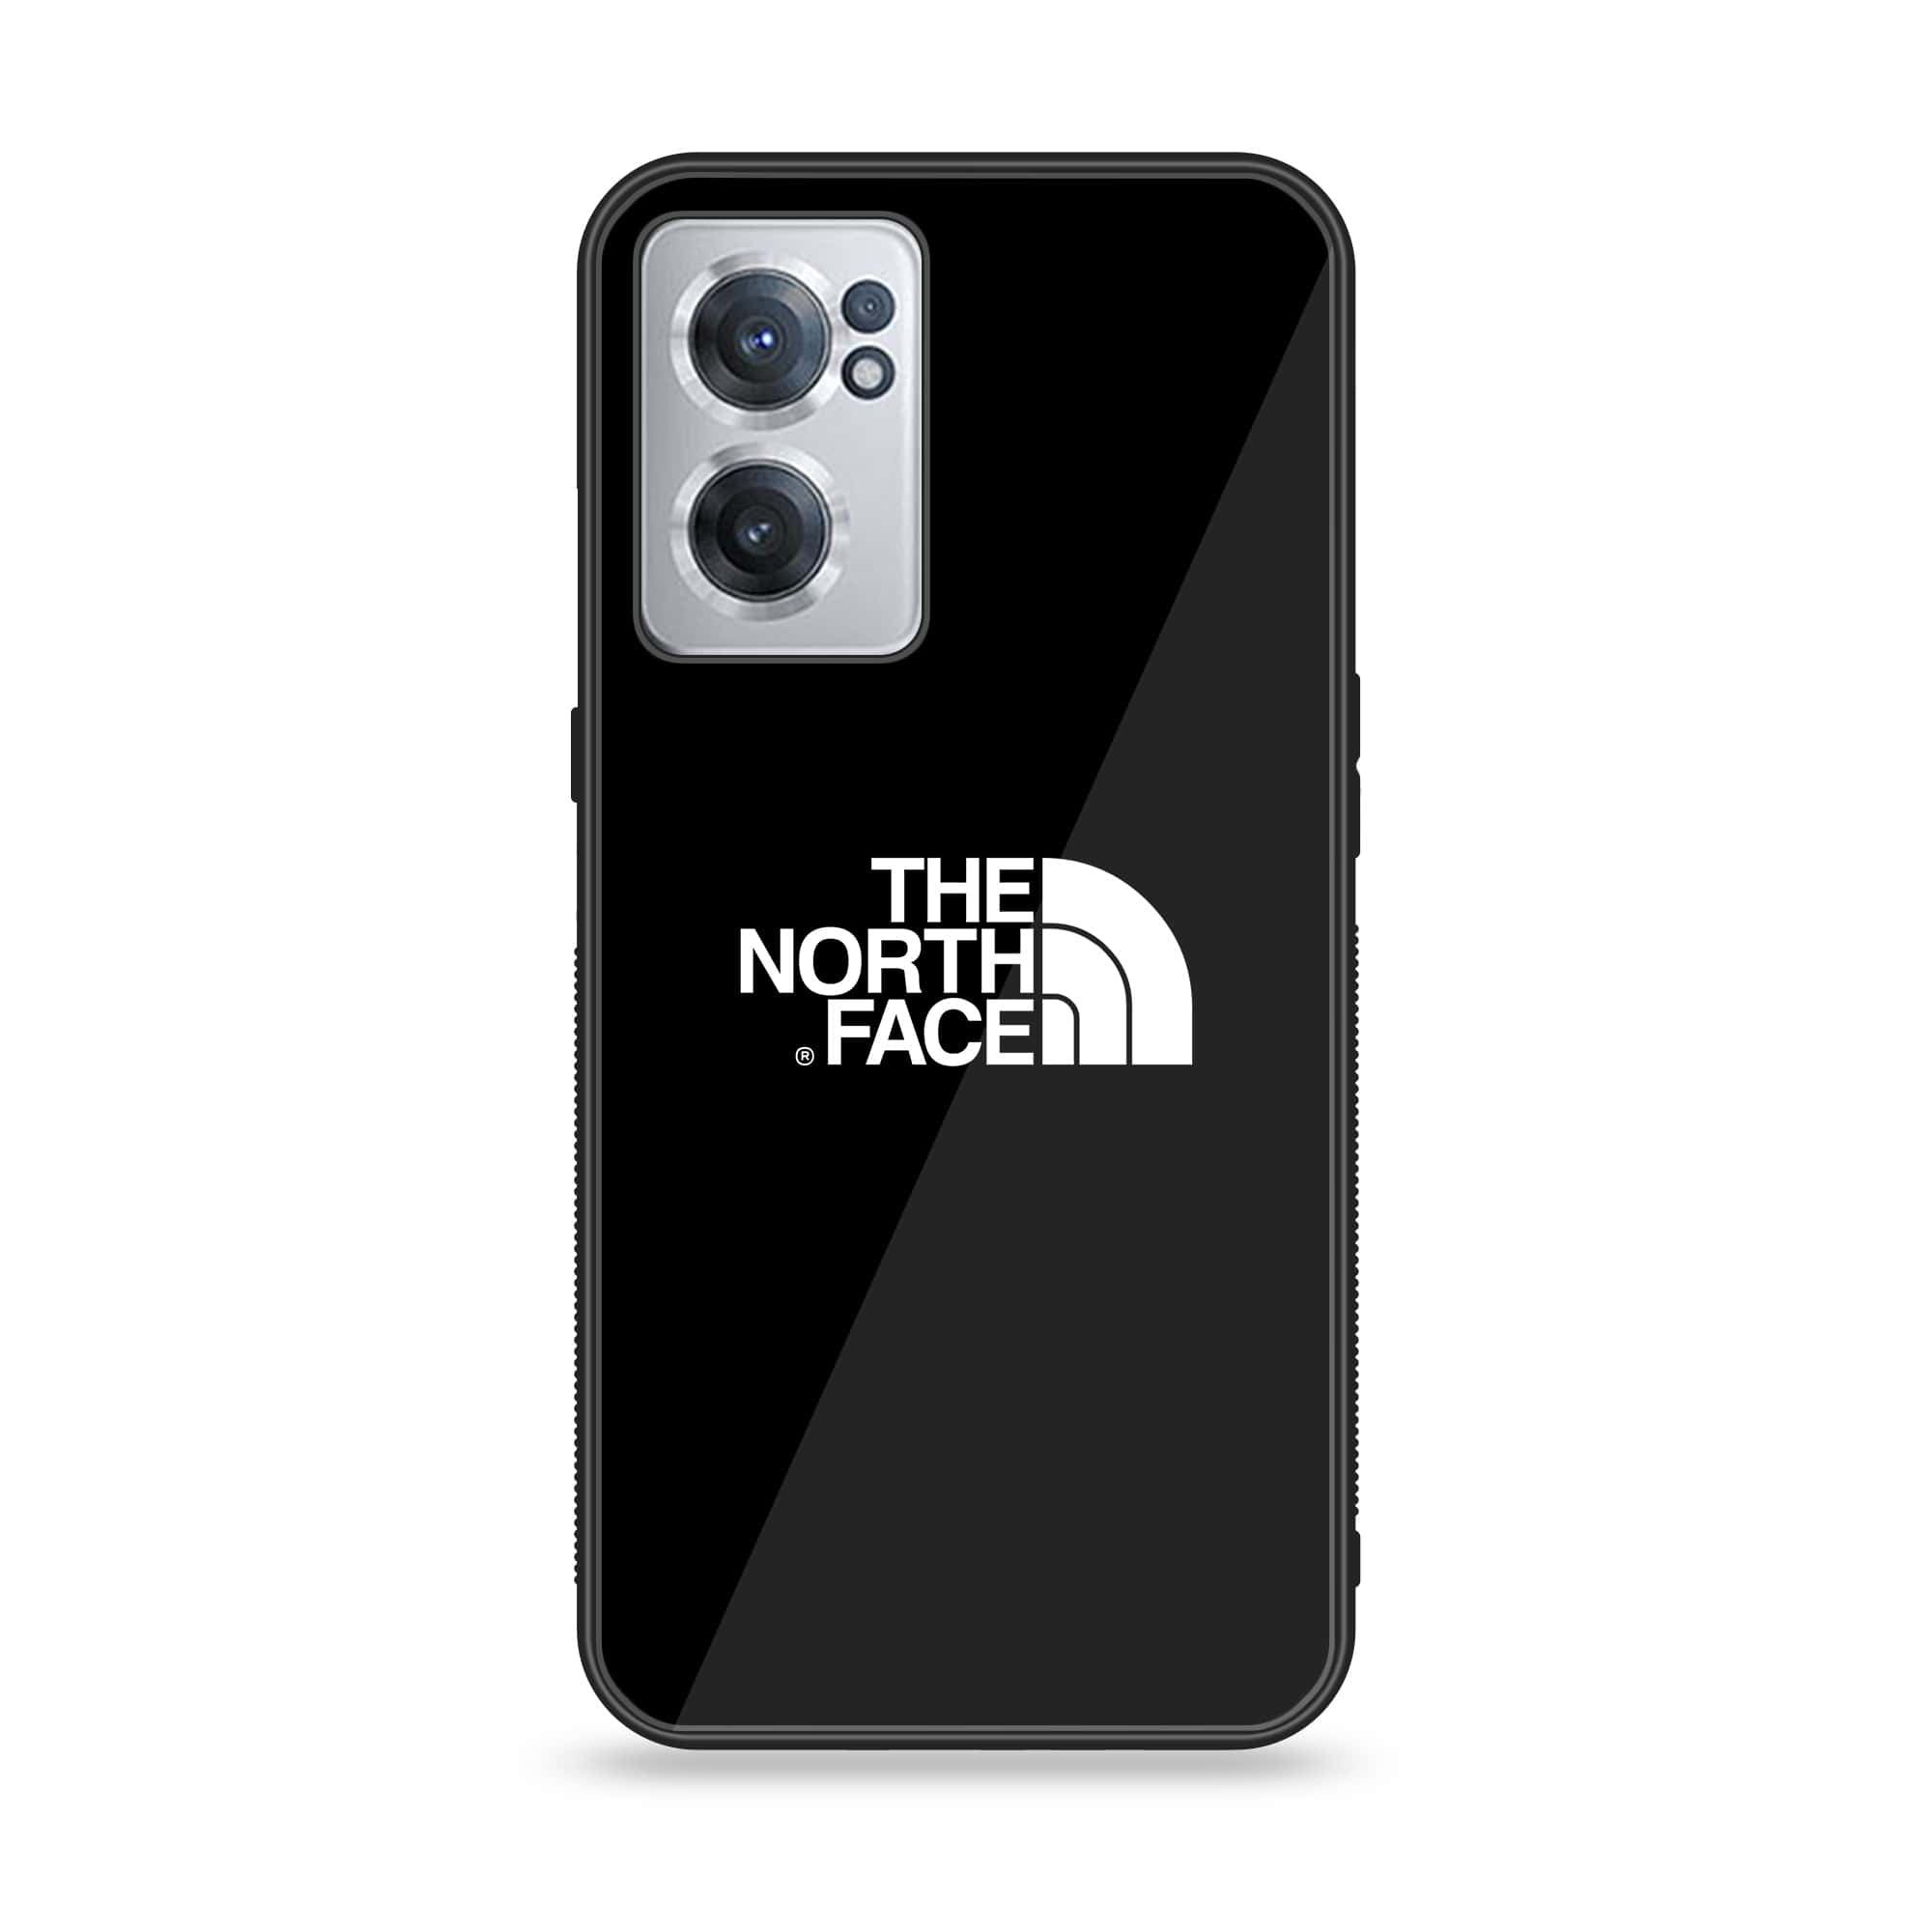 OnePlus Nord CE 2 5G - The North Face Series - Premium Printed Glass soft Bumper shock Proof Case